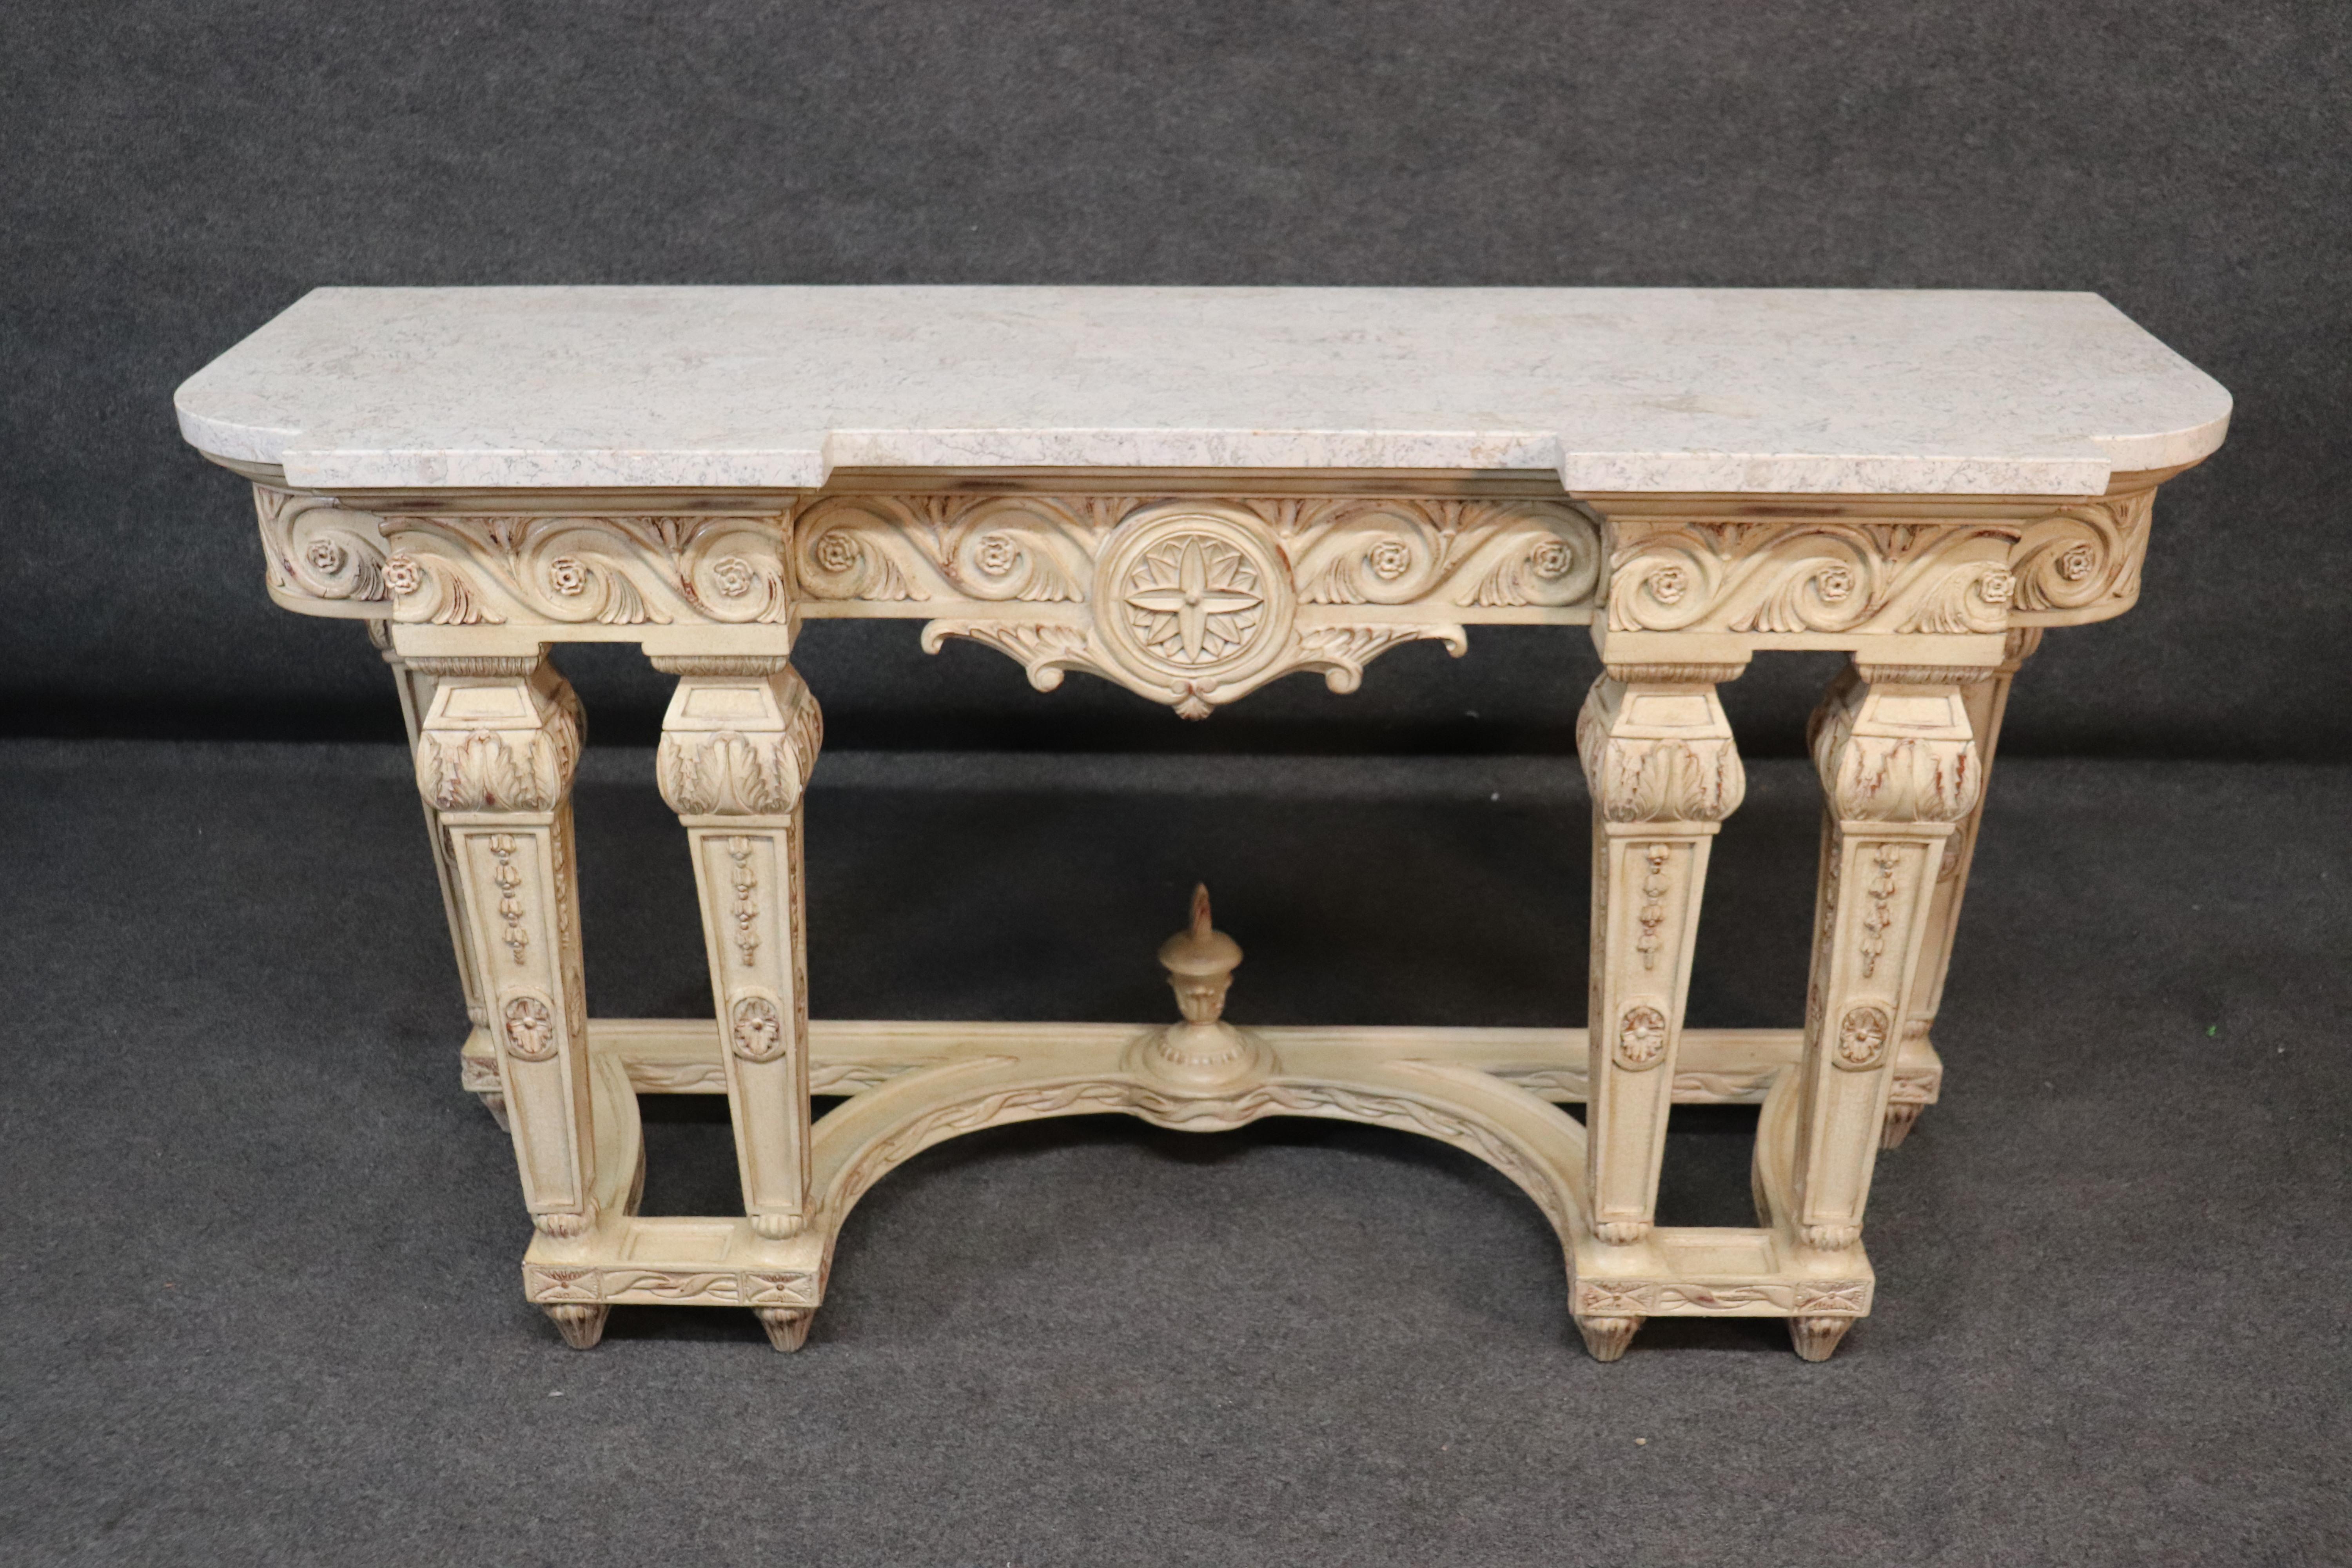 This is a beautiful French Louis XV style console with a 